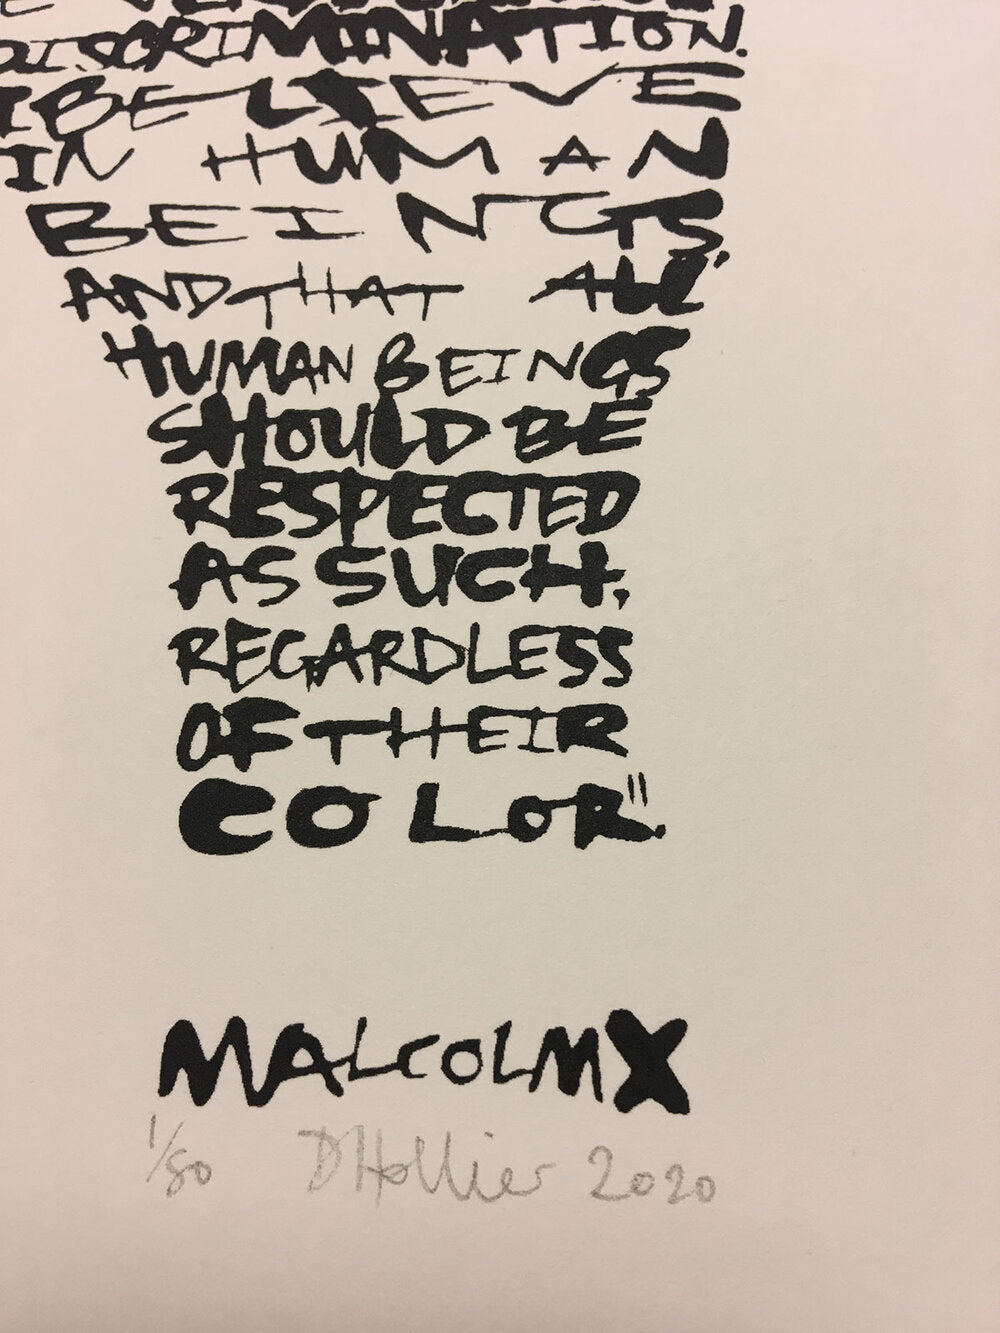 "I am not a Racist..." - Malcolm X